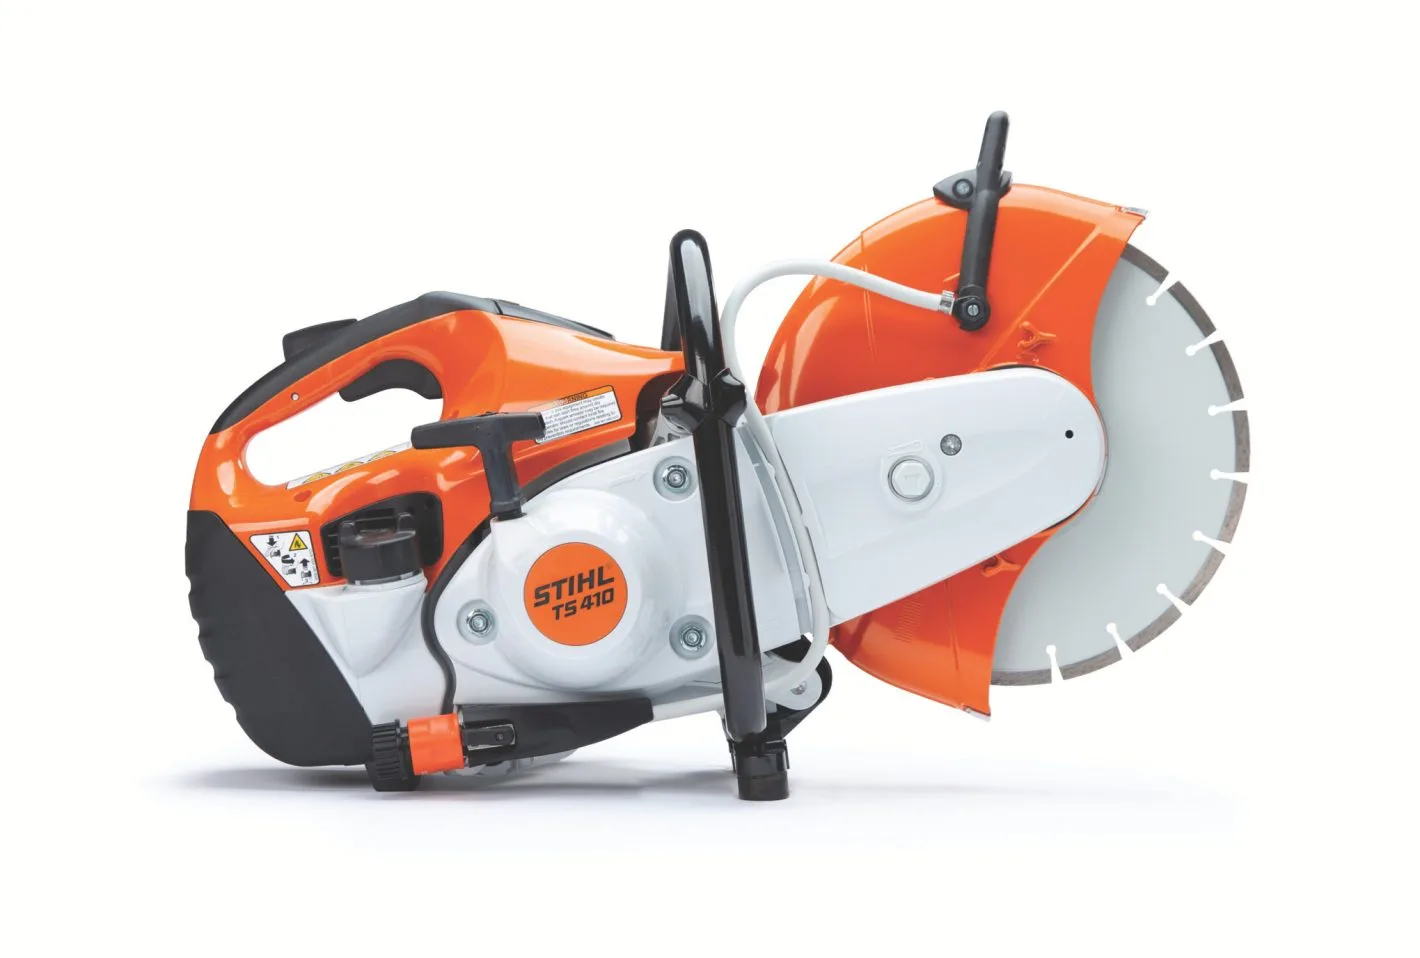 Stihl cutting cut off machine tool and plant hire in West Yorkshire Cleckheaton